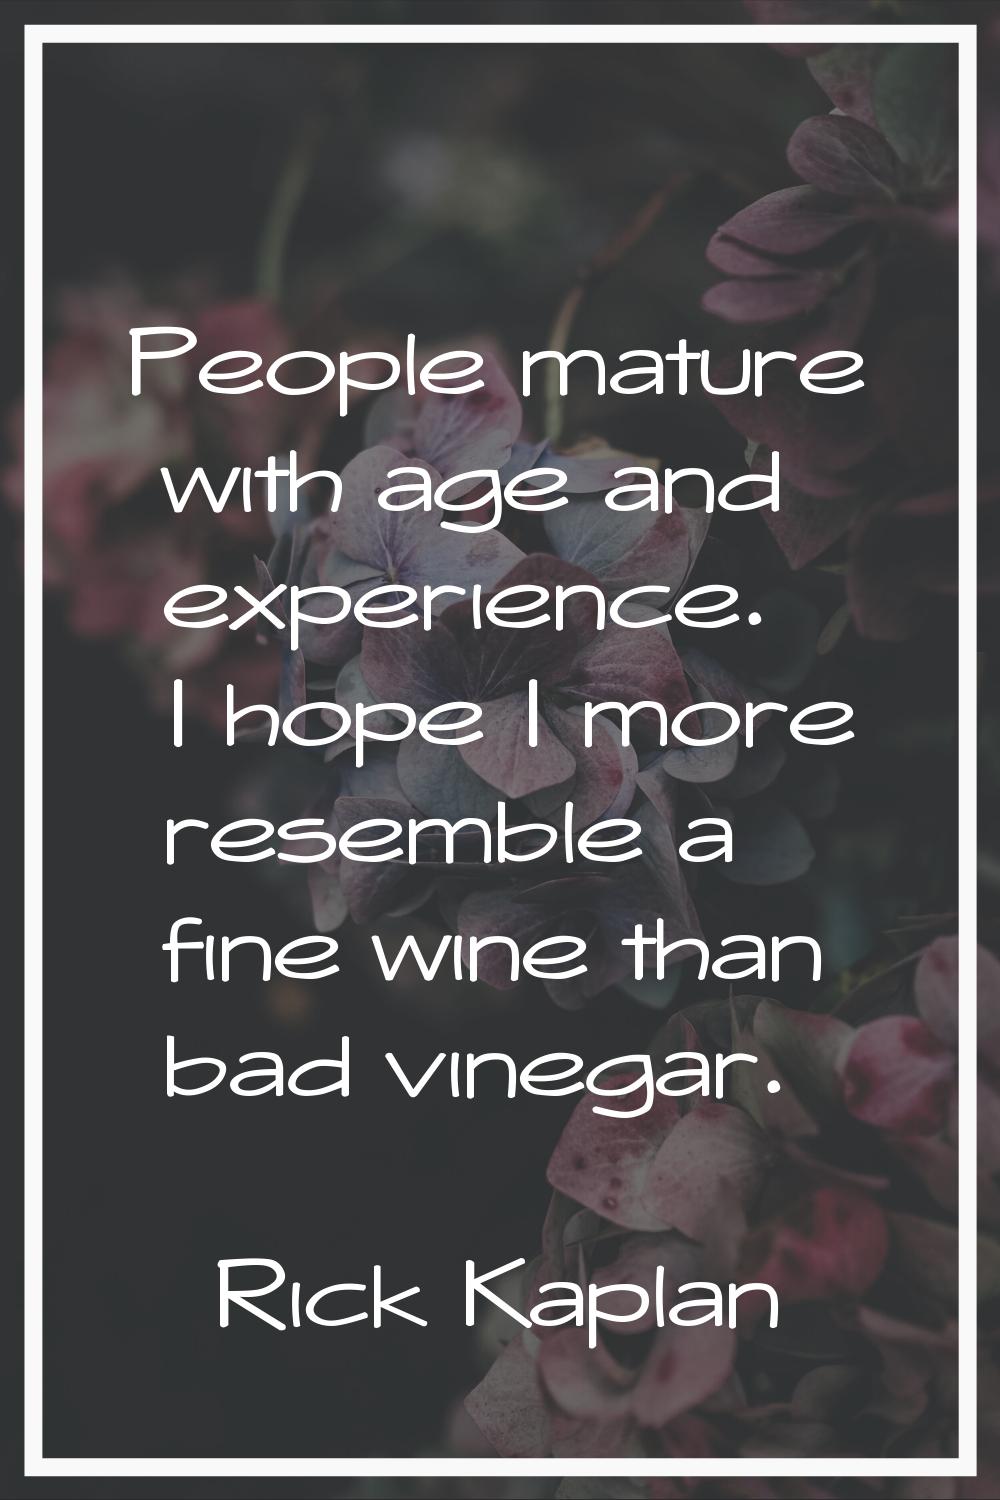 People mature with age and experience. I hope I more resemble a fine wine than bad vinegar.